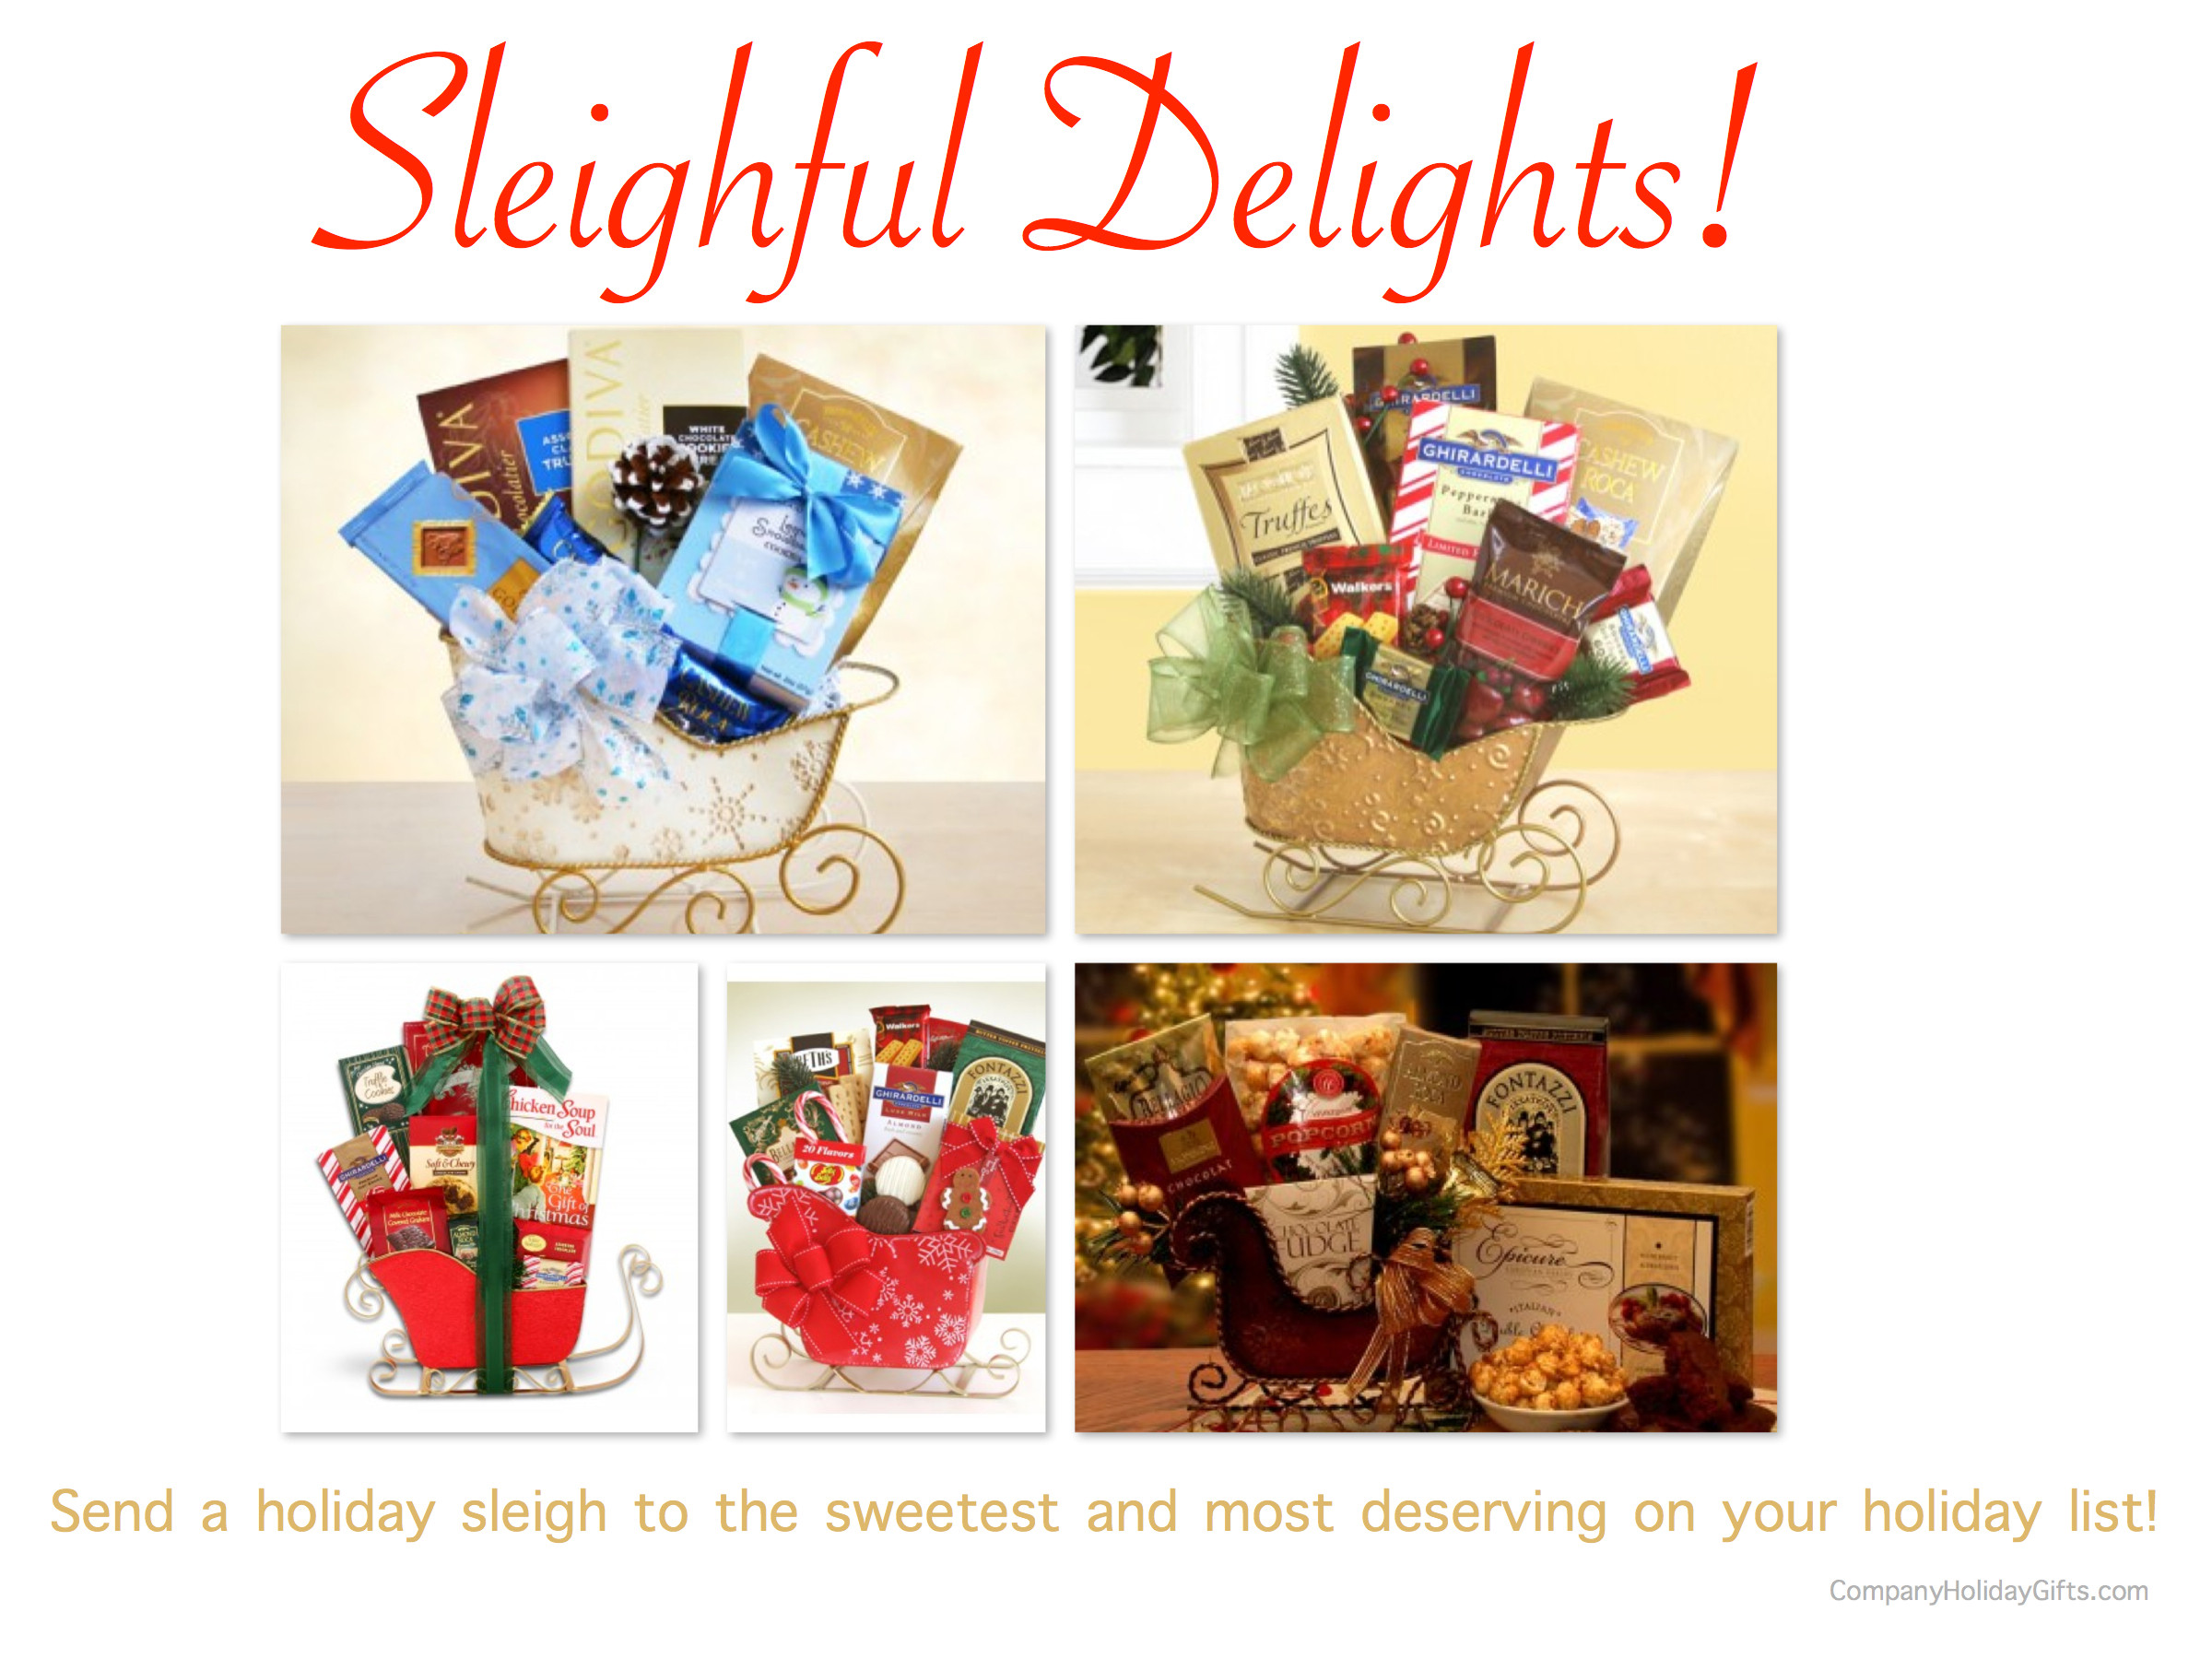 Client Holiday Gift Ideas
 Best Holiday Gifts for Business Associates & Clients